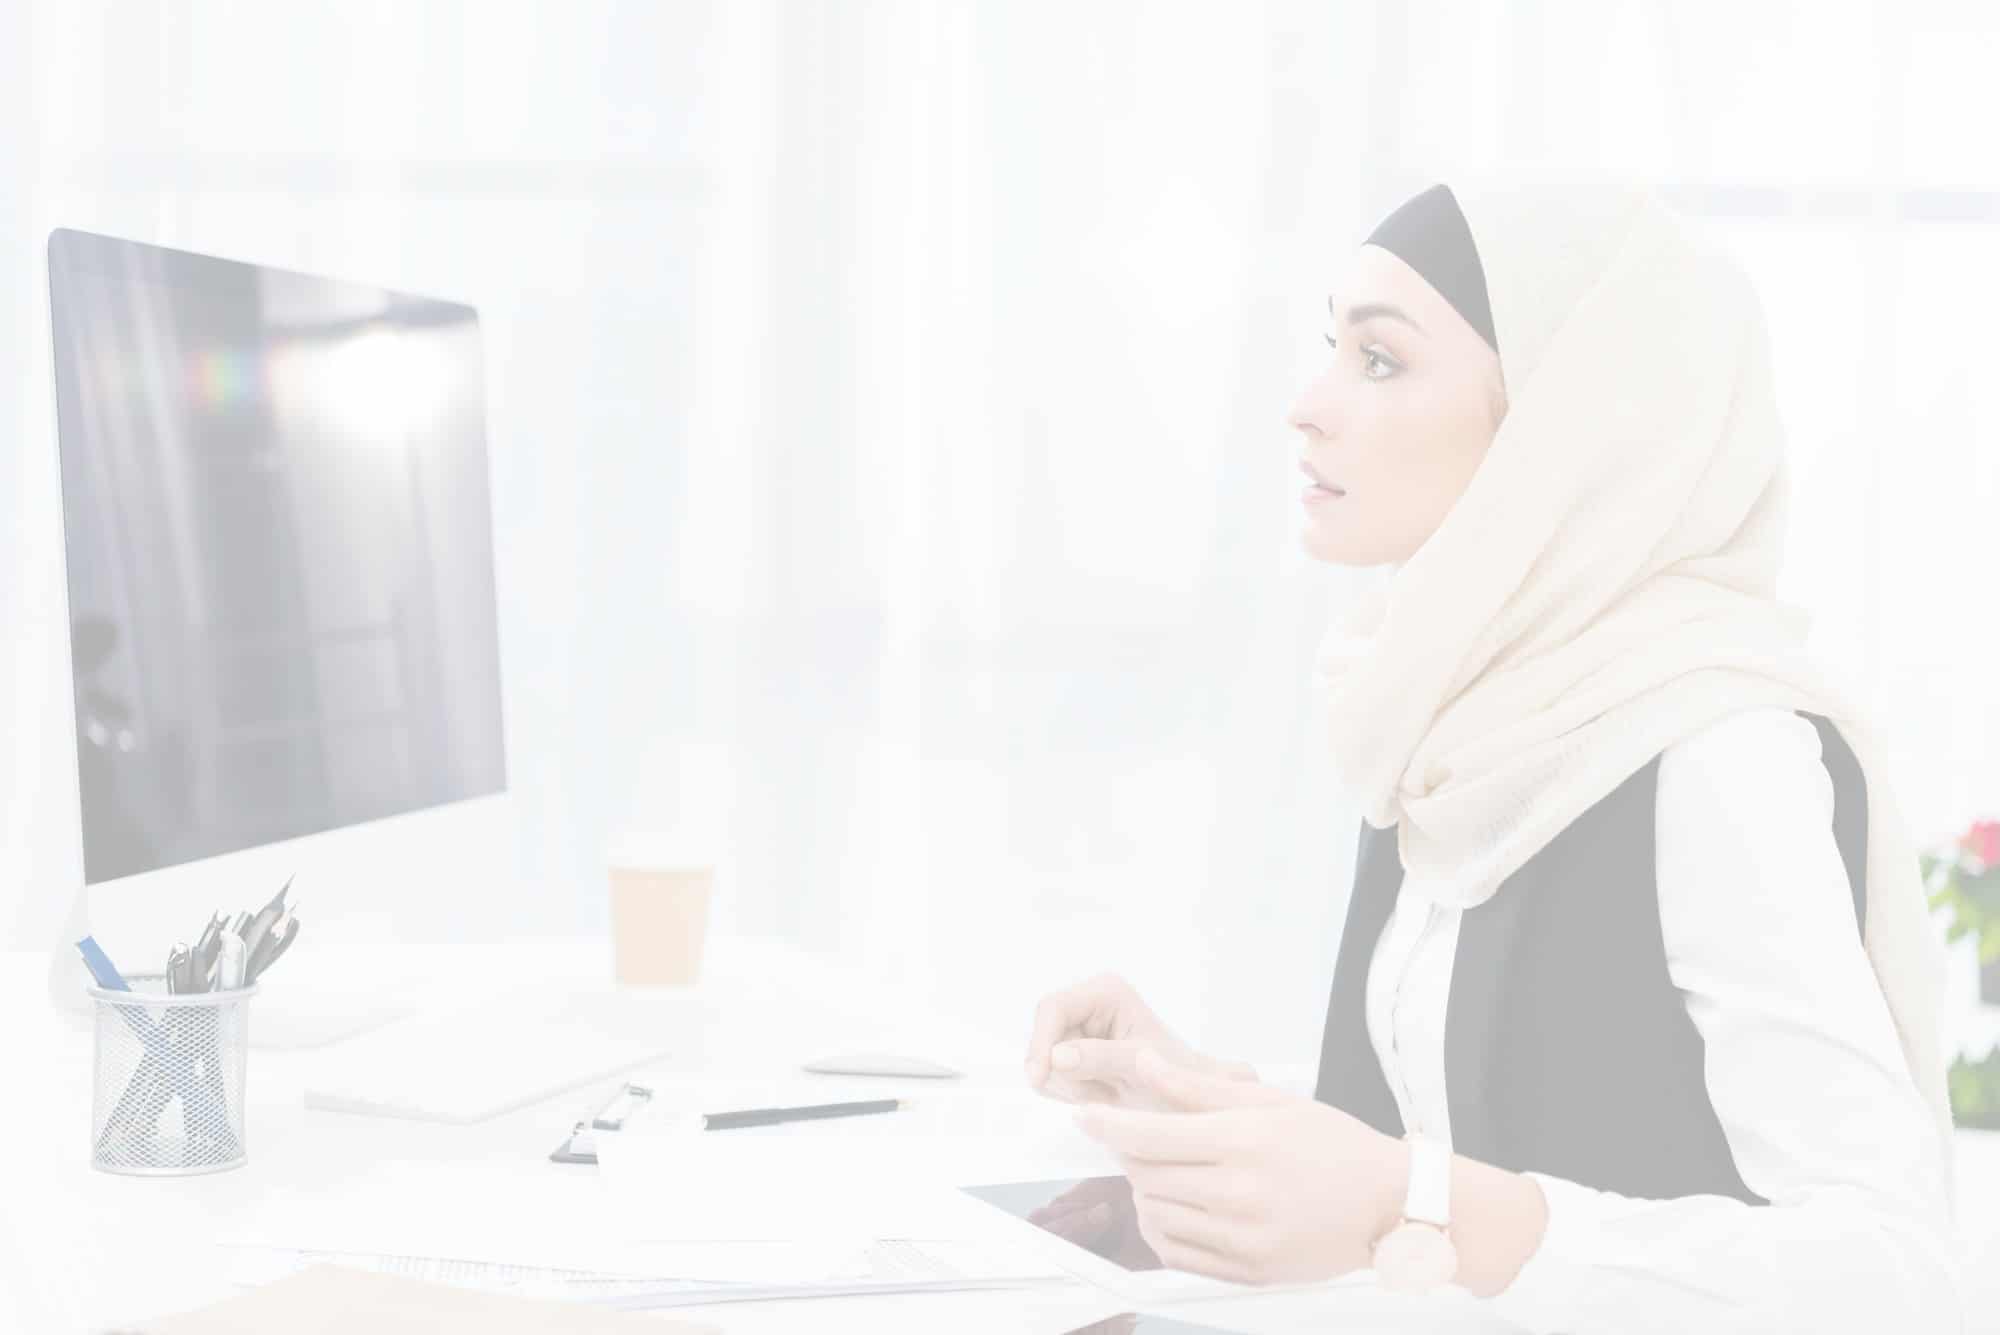 On the right, a professional Muslim woman sitting at her desk looking at computer monitor on the left.